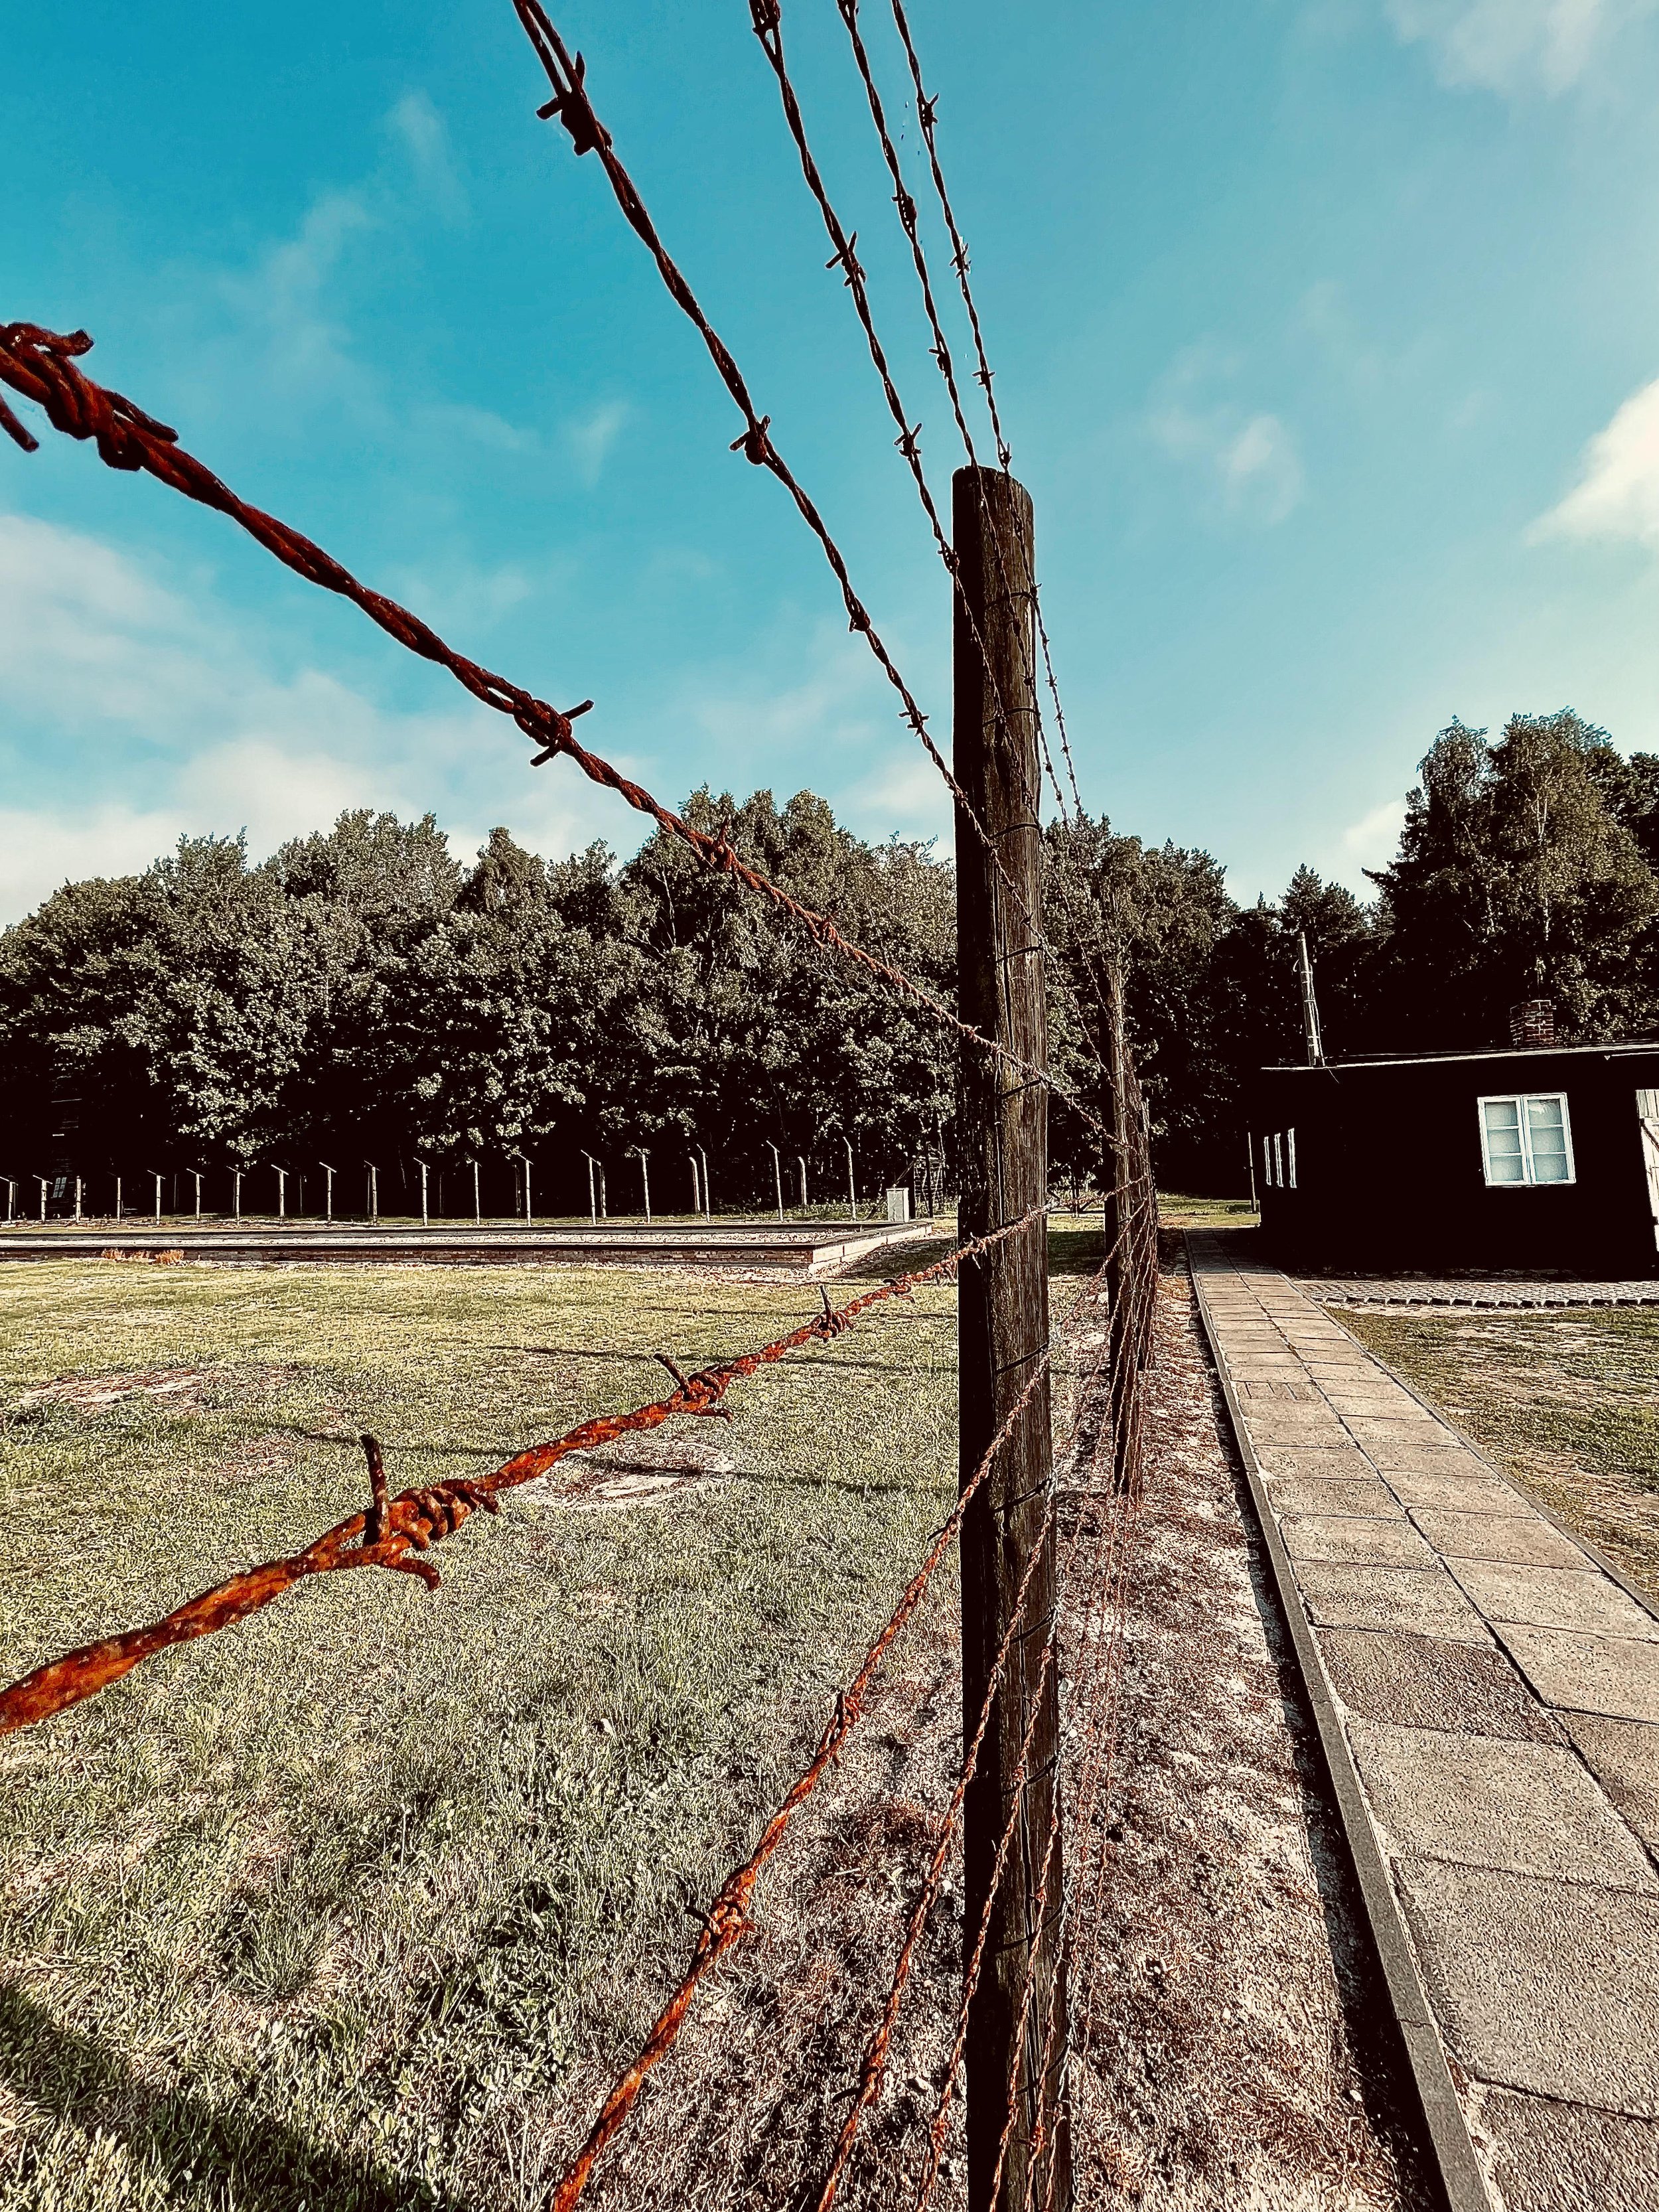 The barbed wire that separated the commandant's office from the prisoners